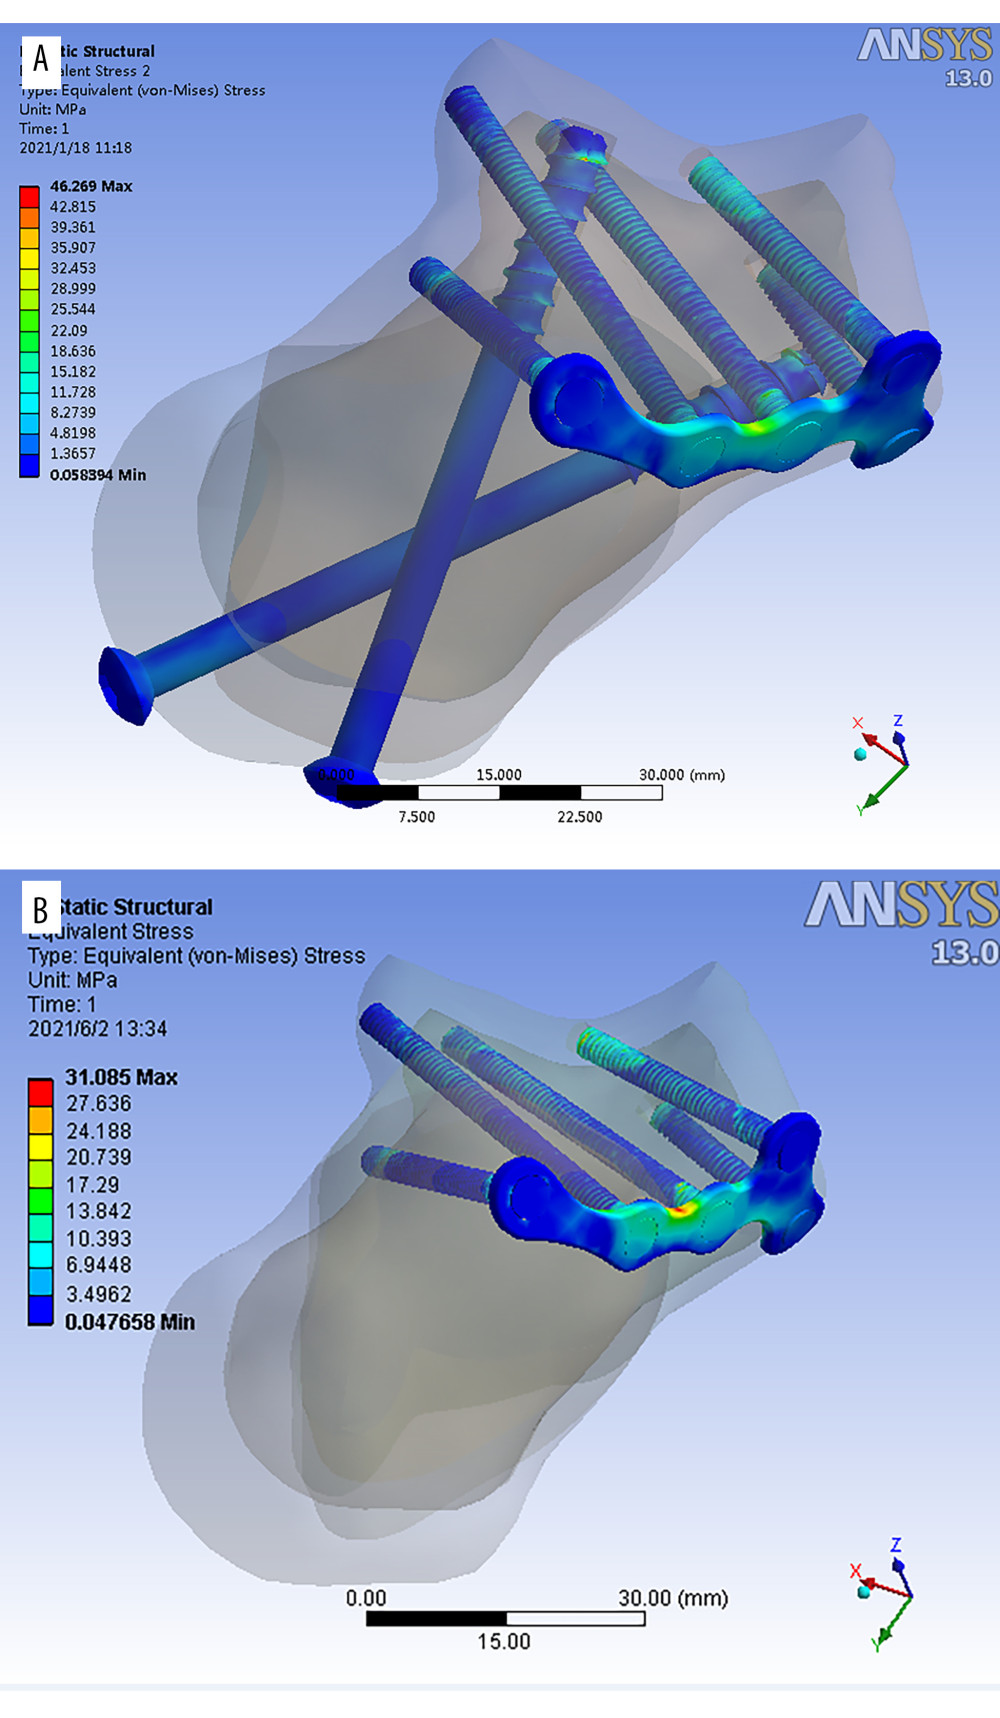 (A, B) 3D model of minimally invasive internal fixation system for Sanders type II calcaneal fracture. (A – simple minimally invasive plate. B – minimally invasive plate with long screws from posterior to anterior).